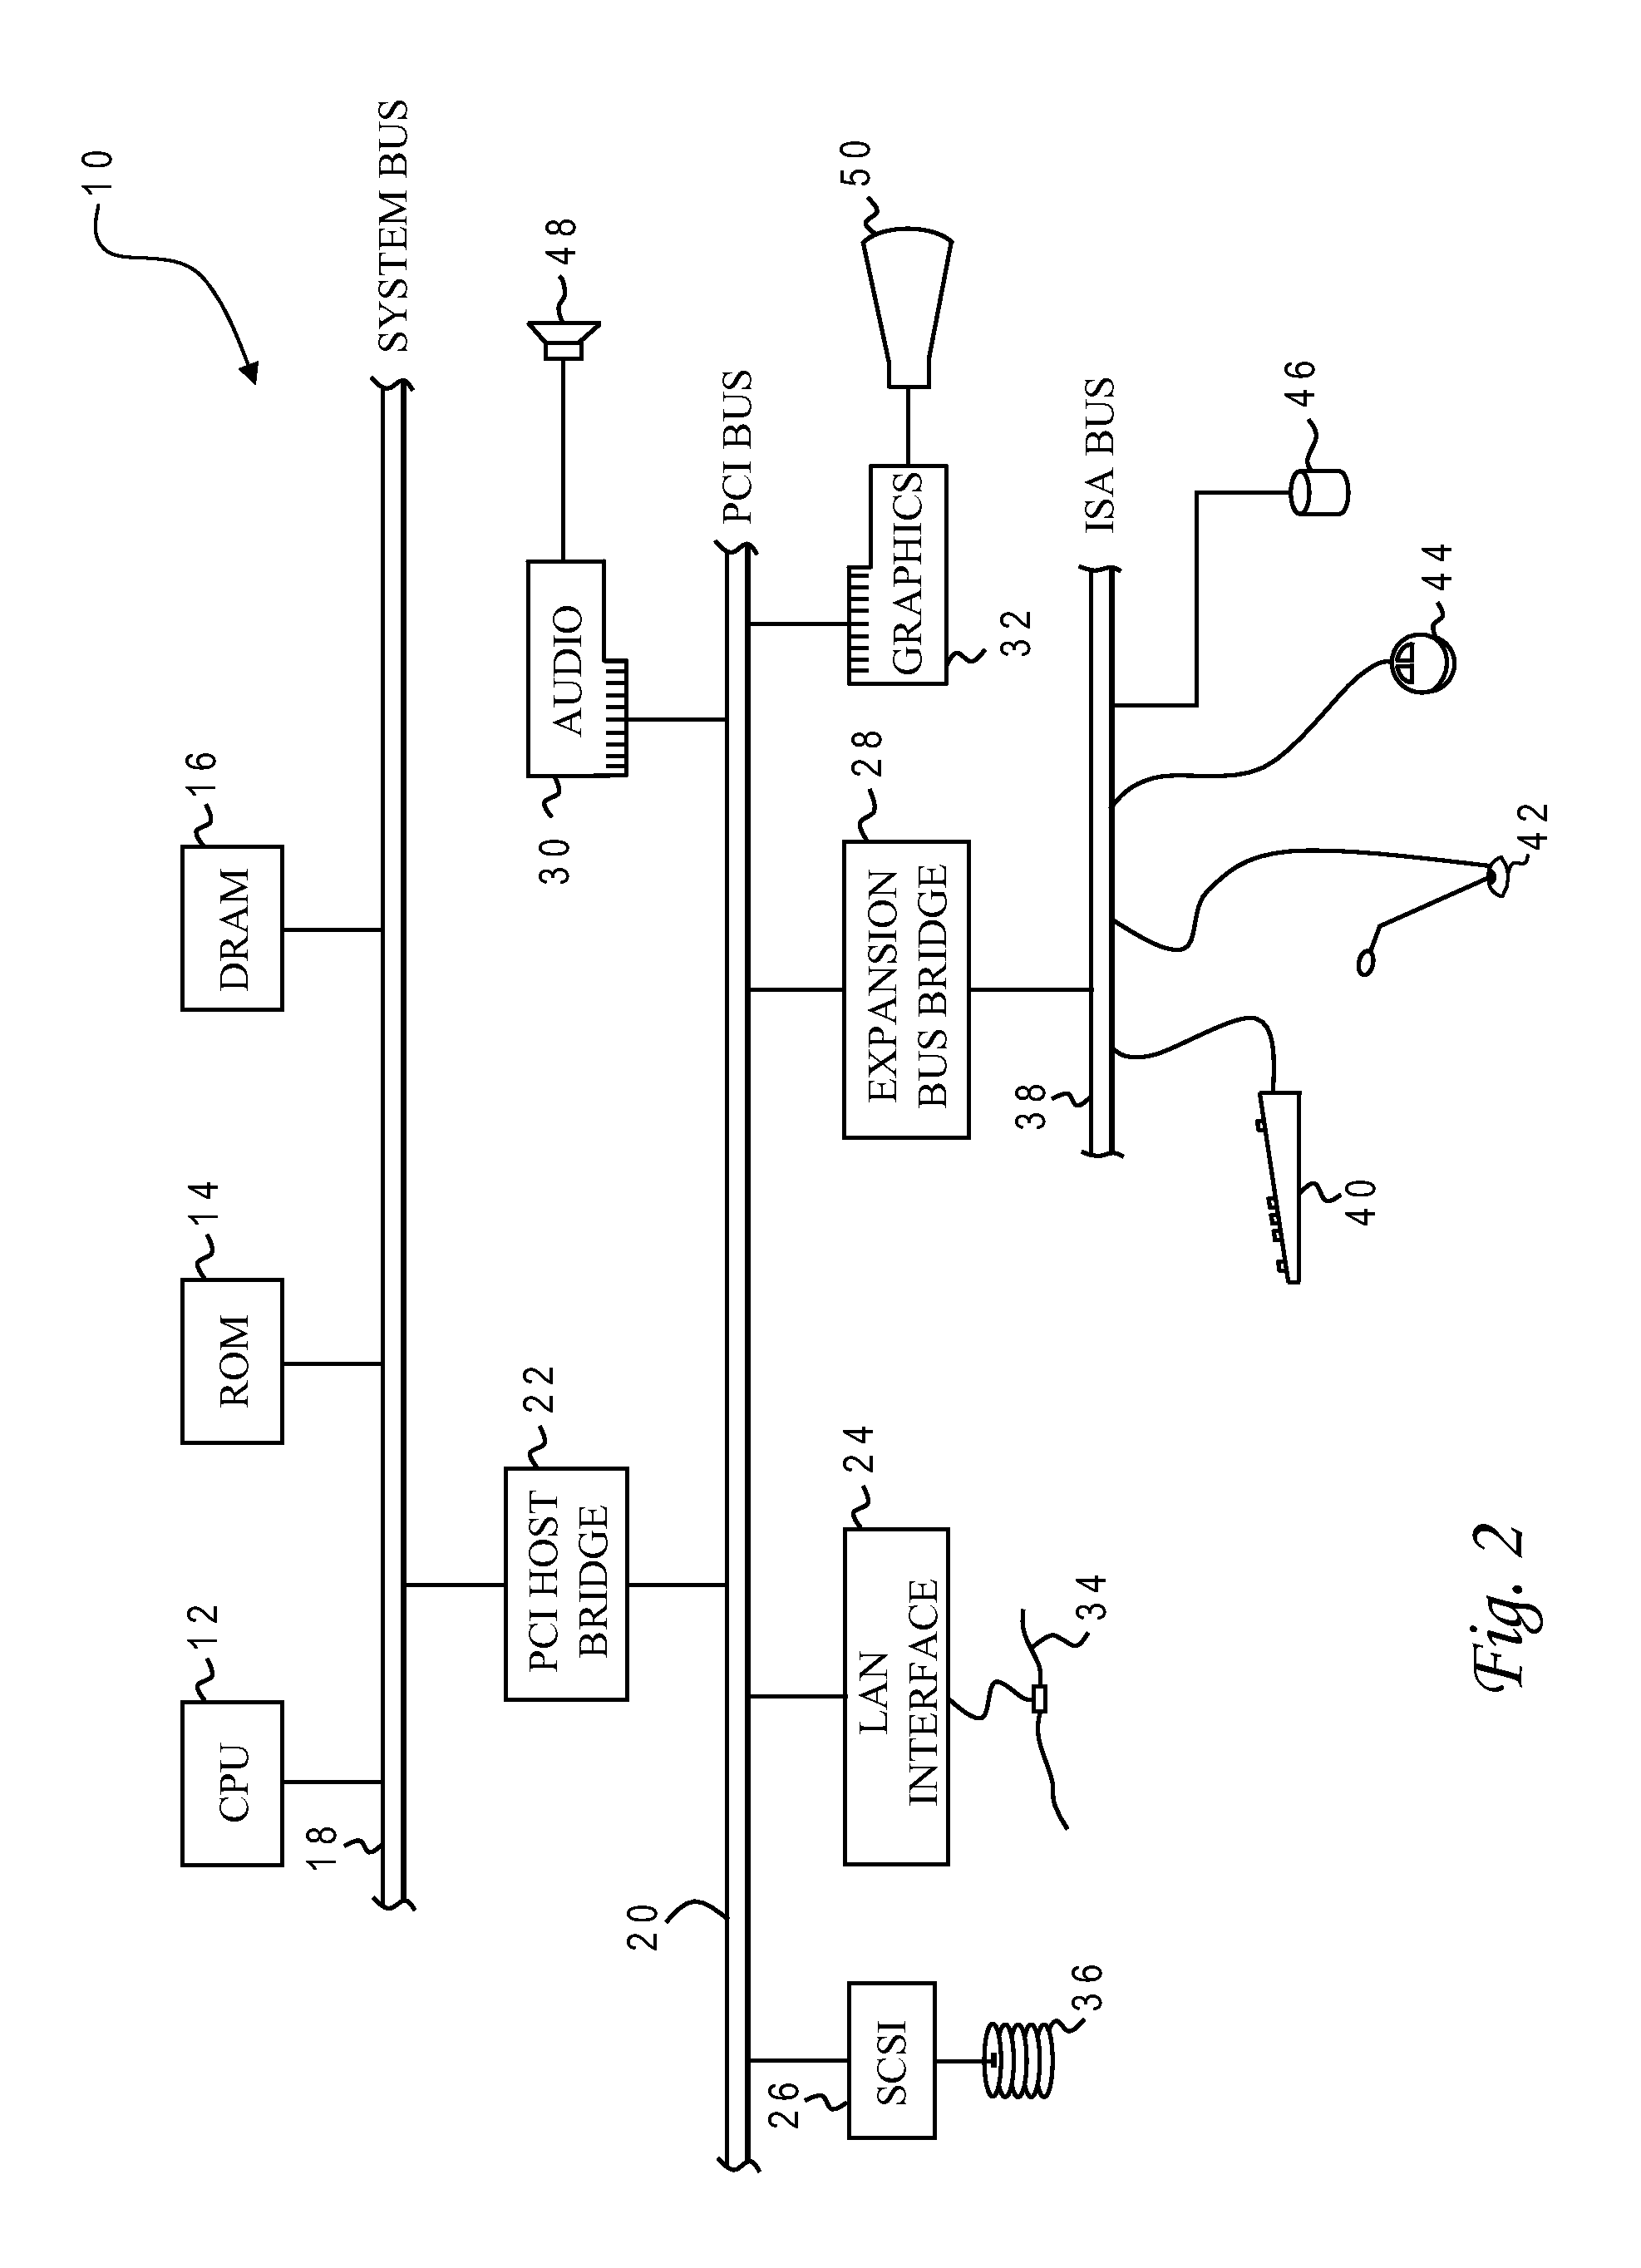 Method for radiation tolerance by automated placement